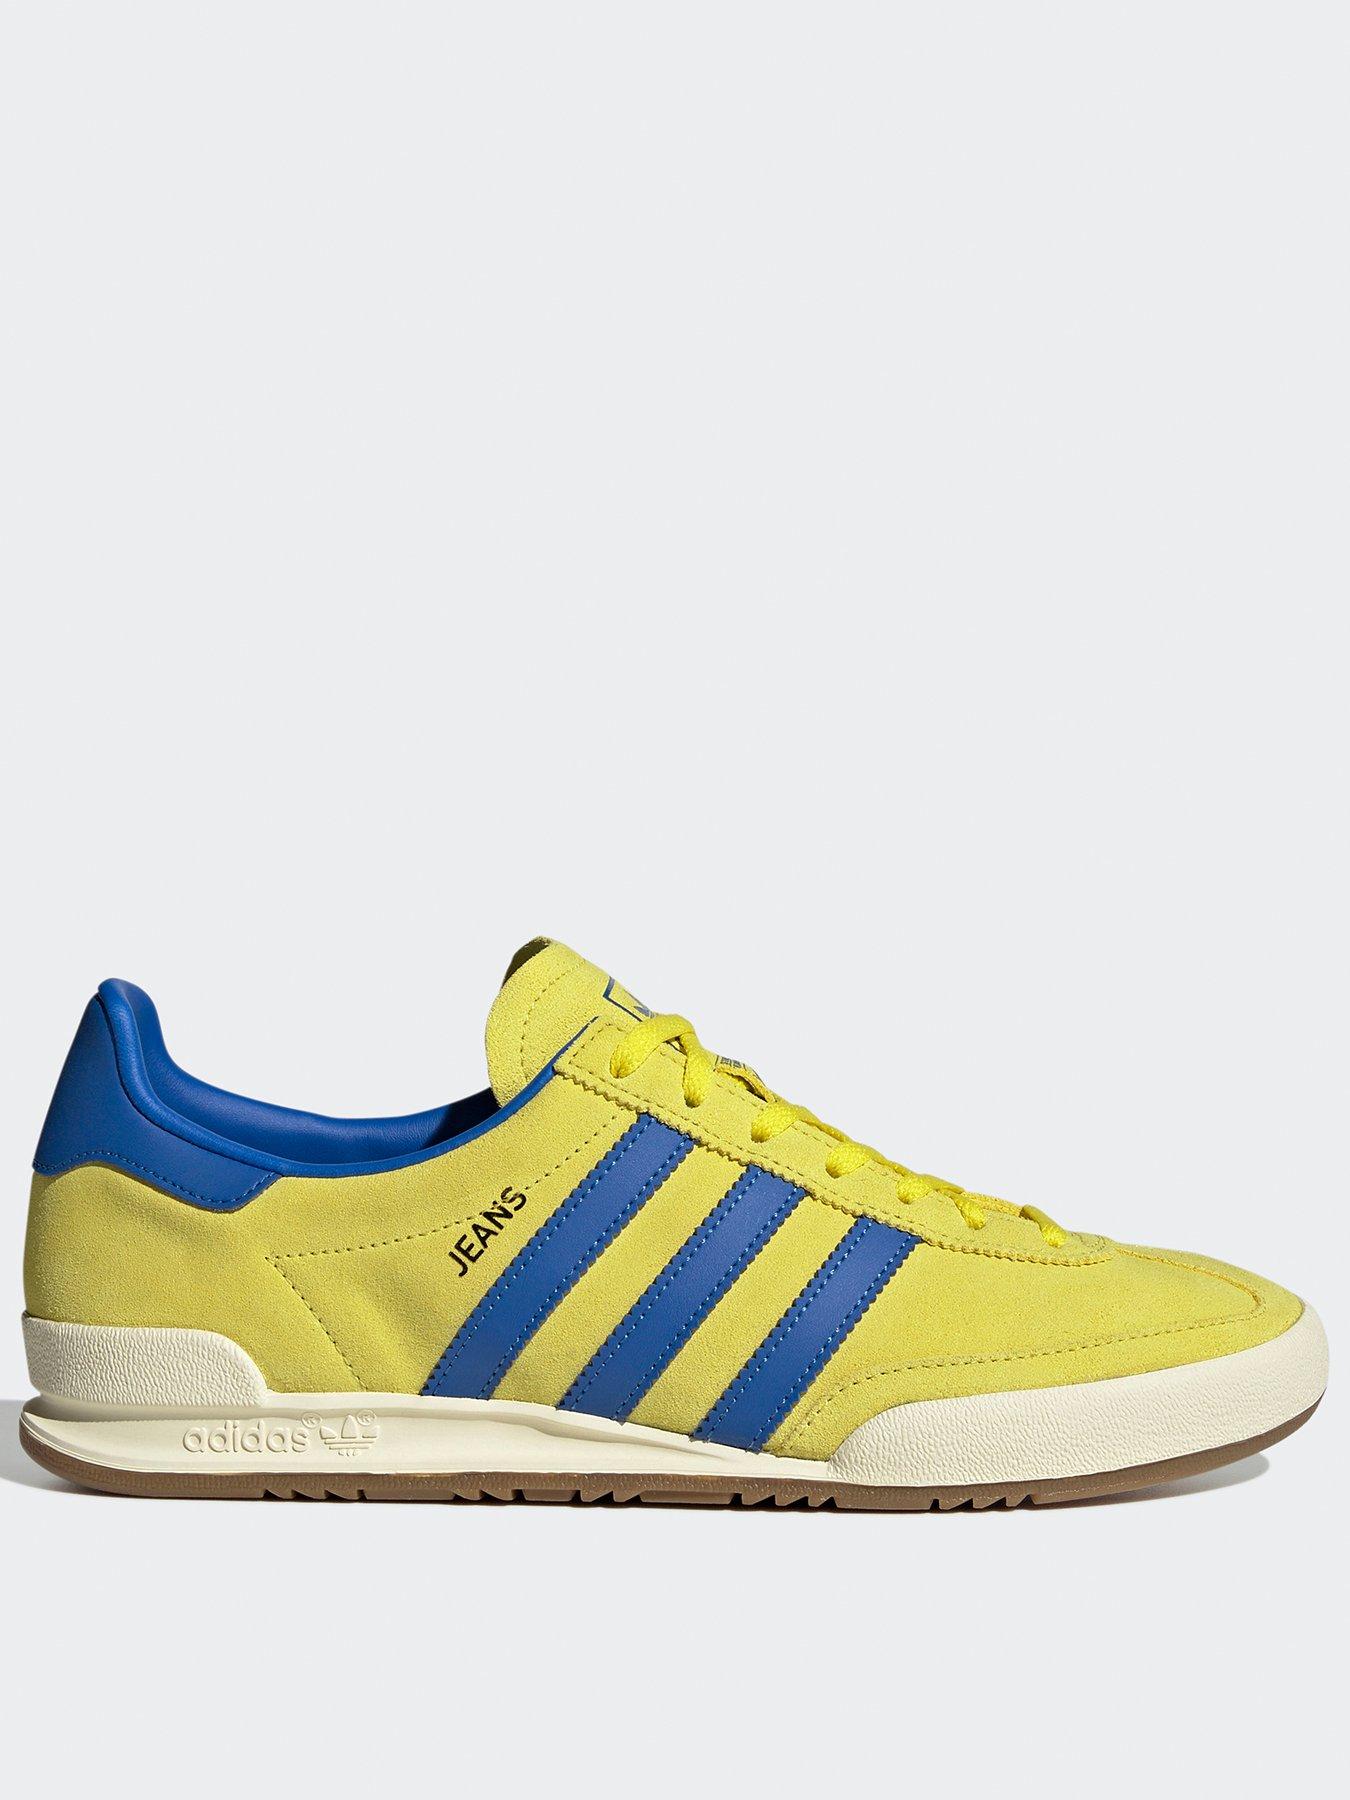 adidas Jeans Trainers - Yellow/Blue | very.co.uk